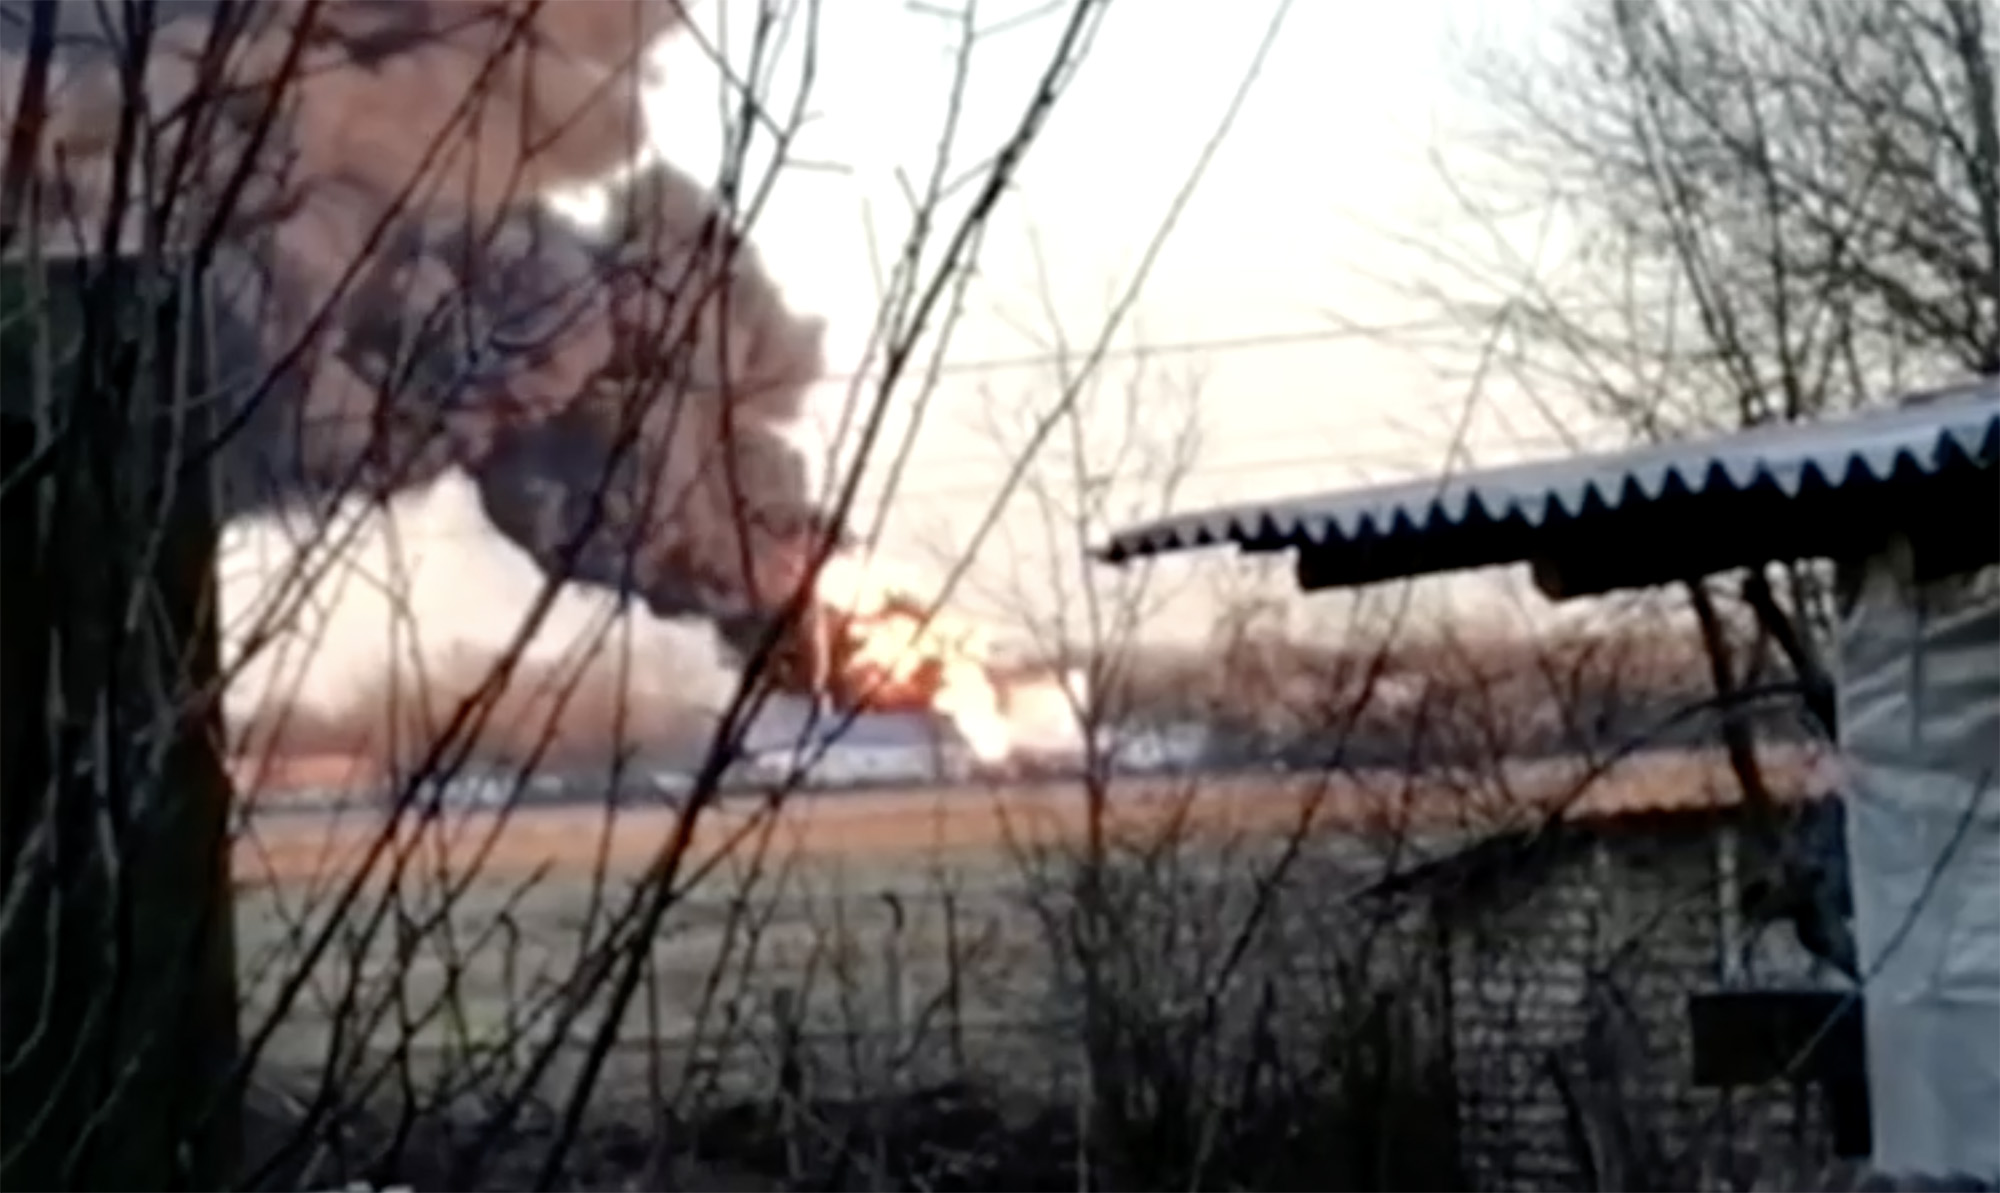 Russian media shows aftermath of alleged drone strike on oil tank at Kursk airfield on December 6.